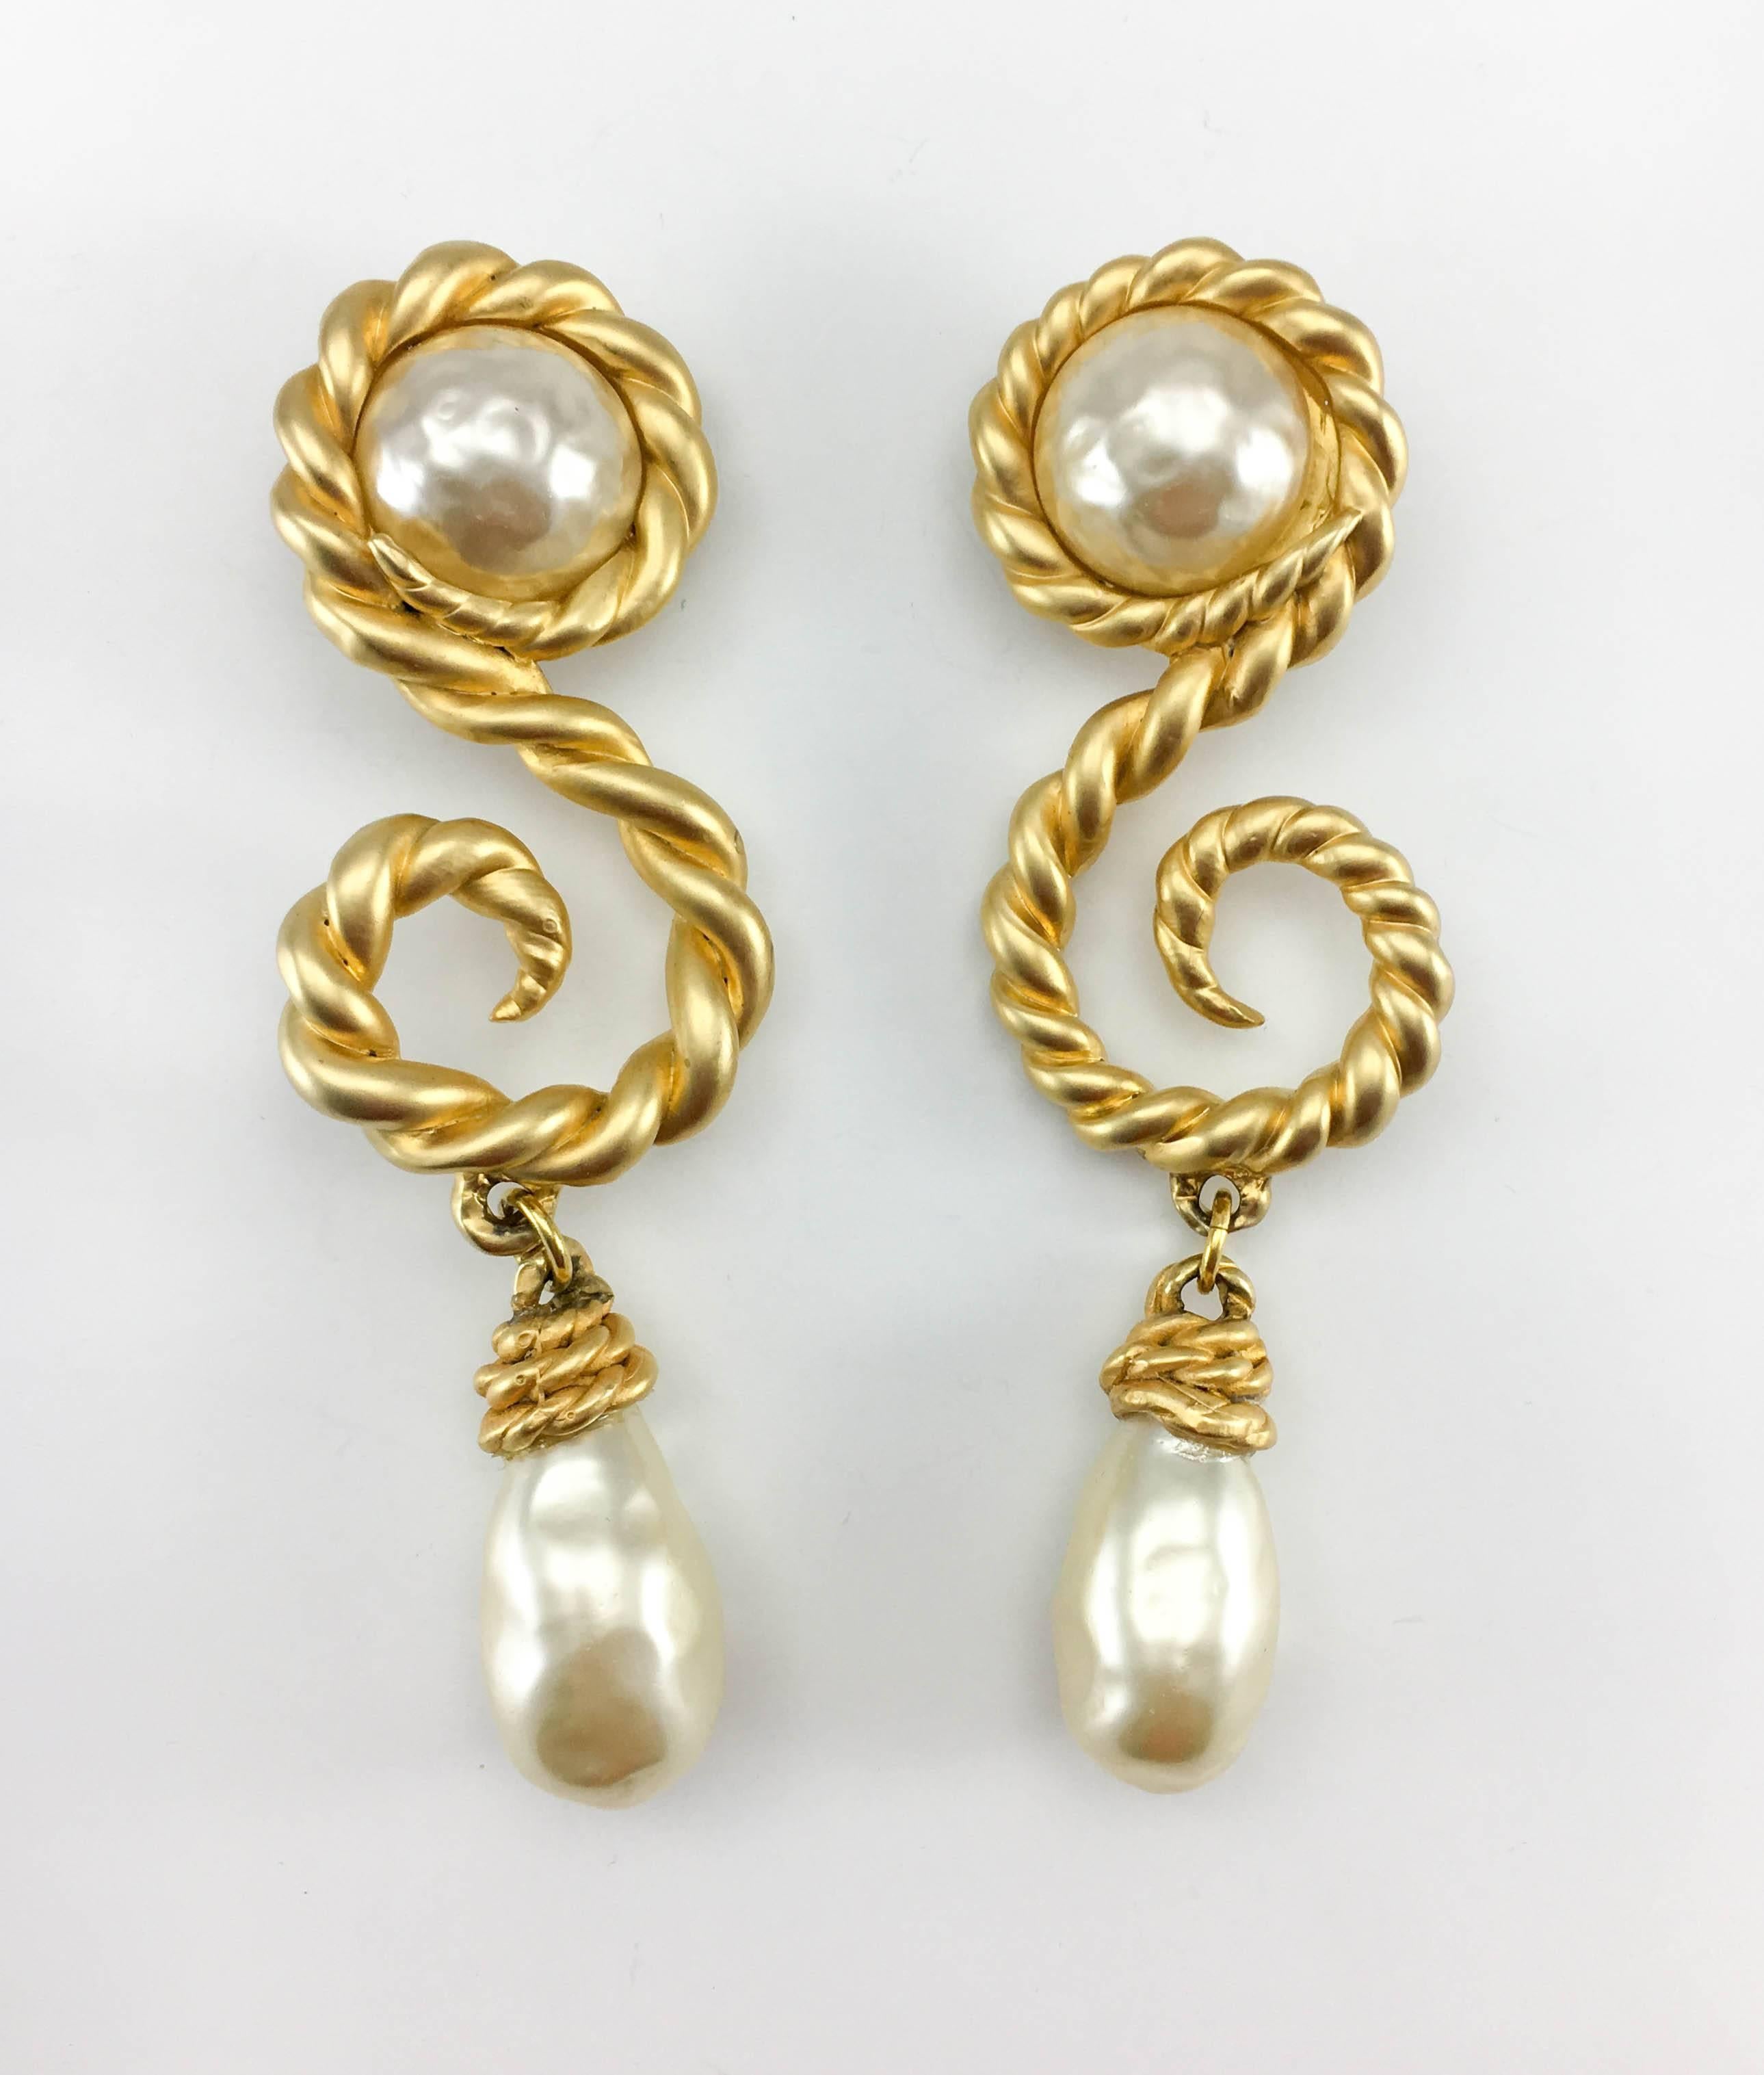 Chanel Runway Massive Matte Gilded Arabesque and Baroque Faux Pearl Clip-On Earrings. These stunning earrings by Chanel were designed by the super jewellery designer Victoire de Castellane for the 1990 Spring / Summer runway show (refer to photos).